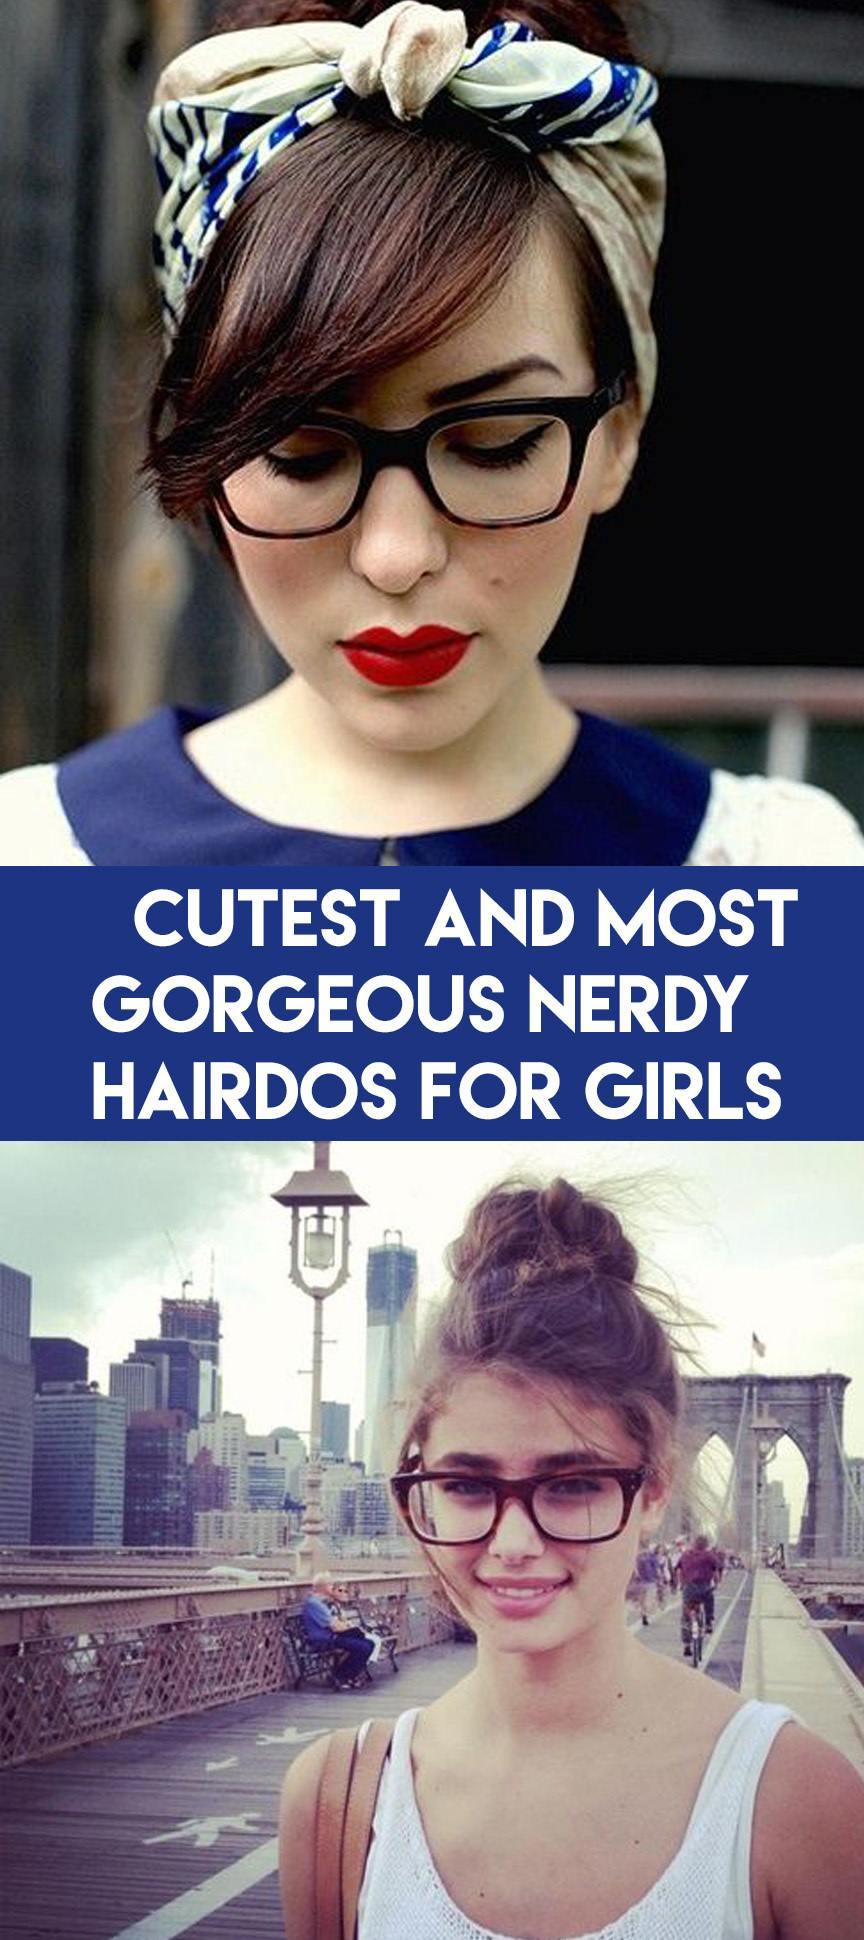 Cute Nerd Hairstyles For Girls-19 Hairstyles For Nerdy Look